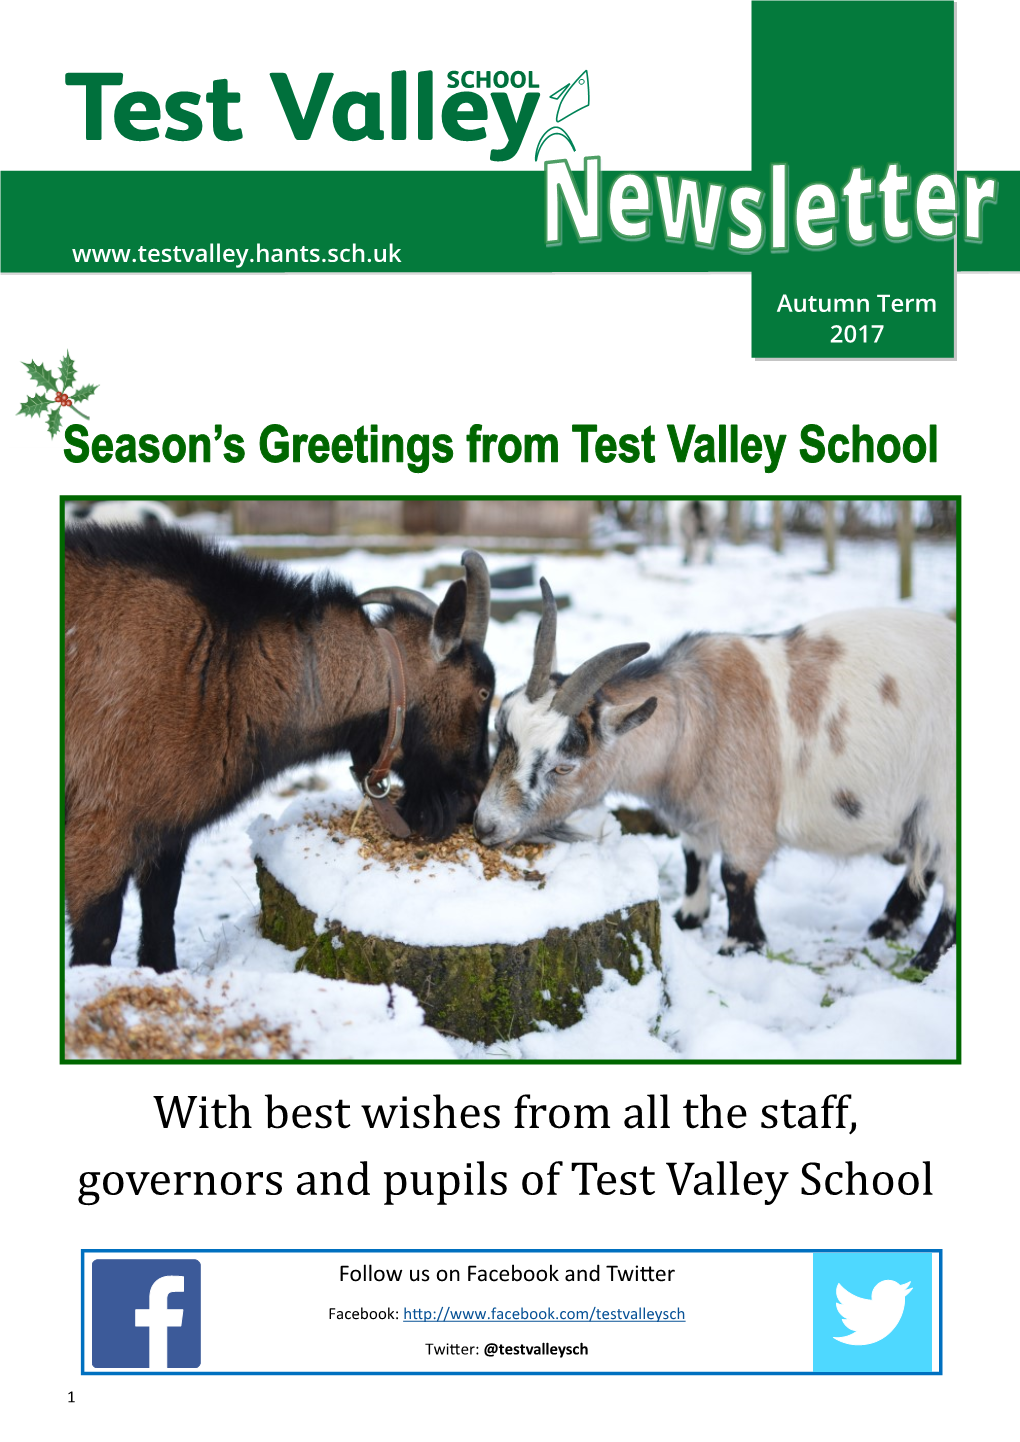 With Best Wishes from All the Staff, Governors and Pupils of Test Valley School